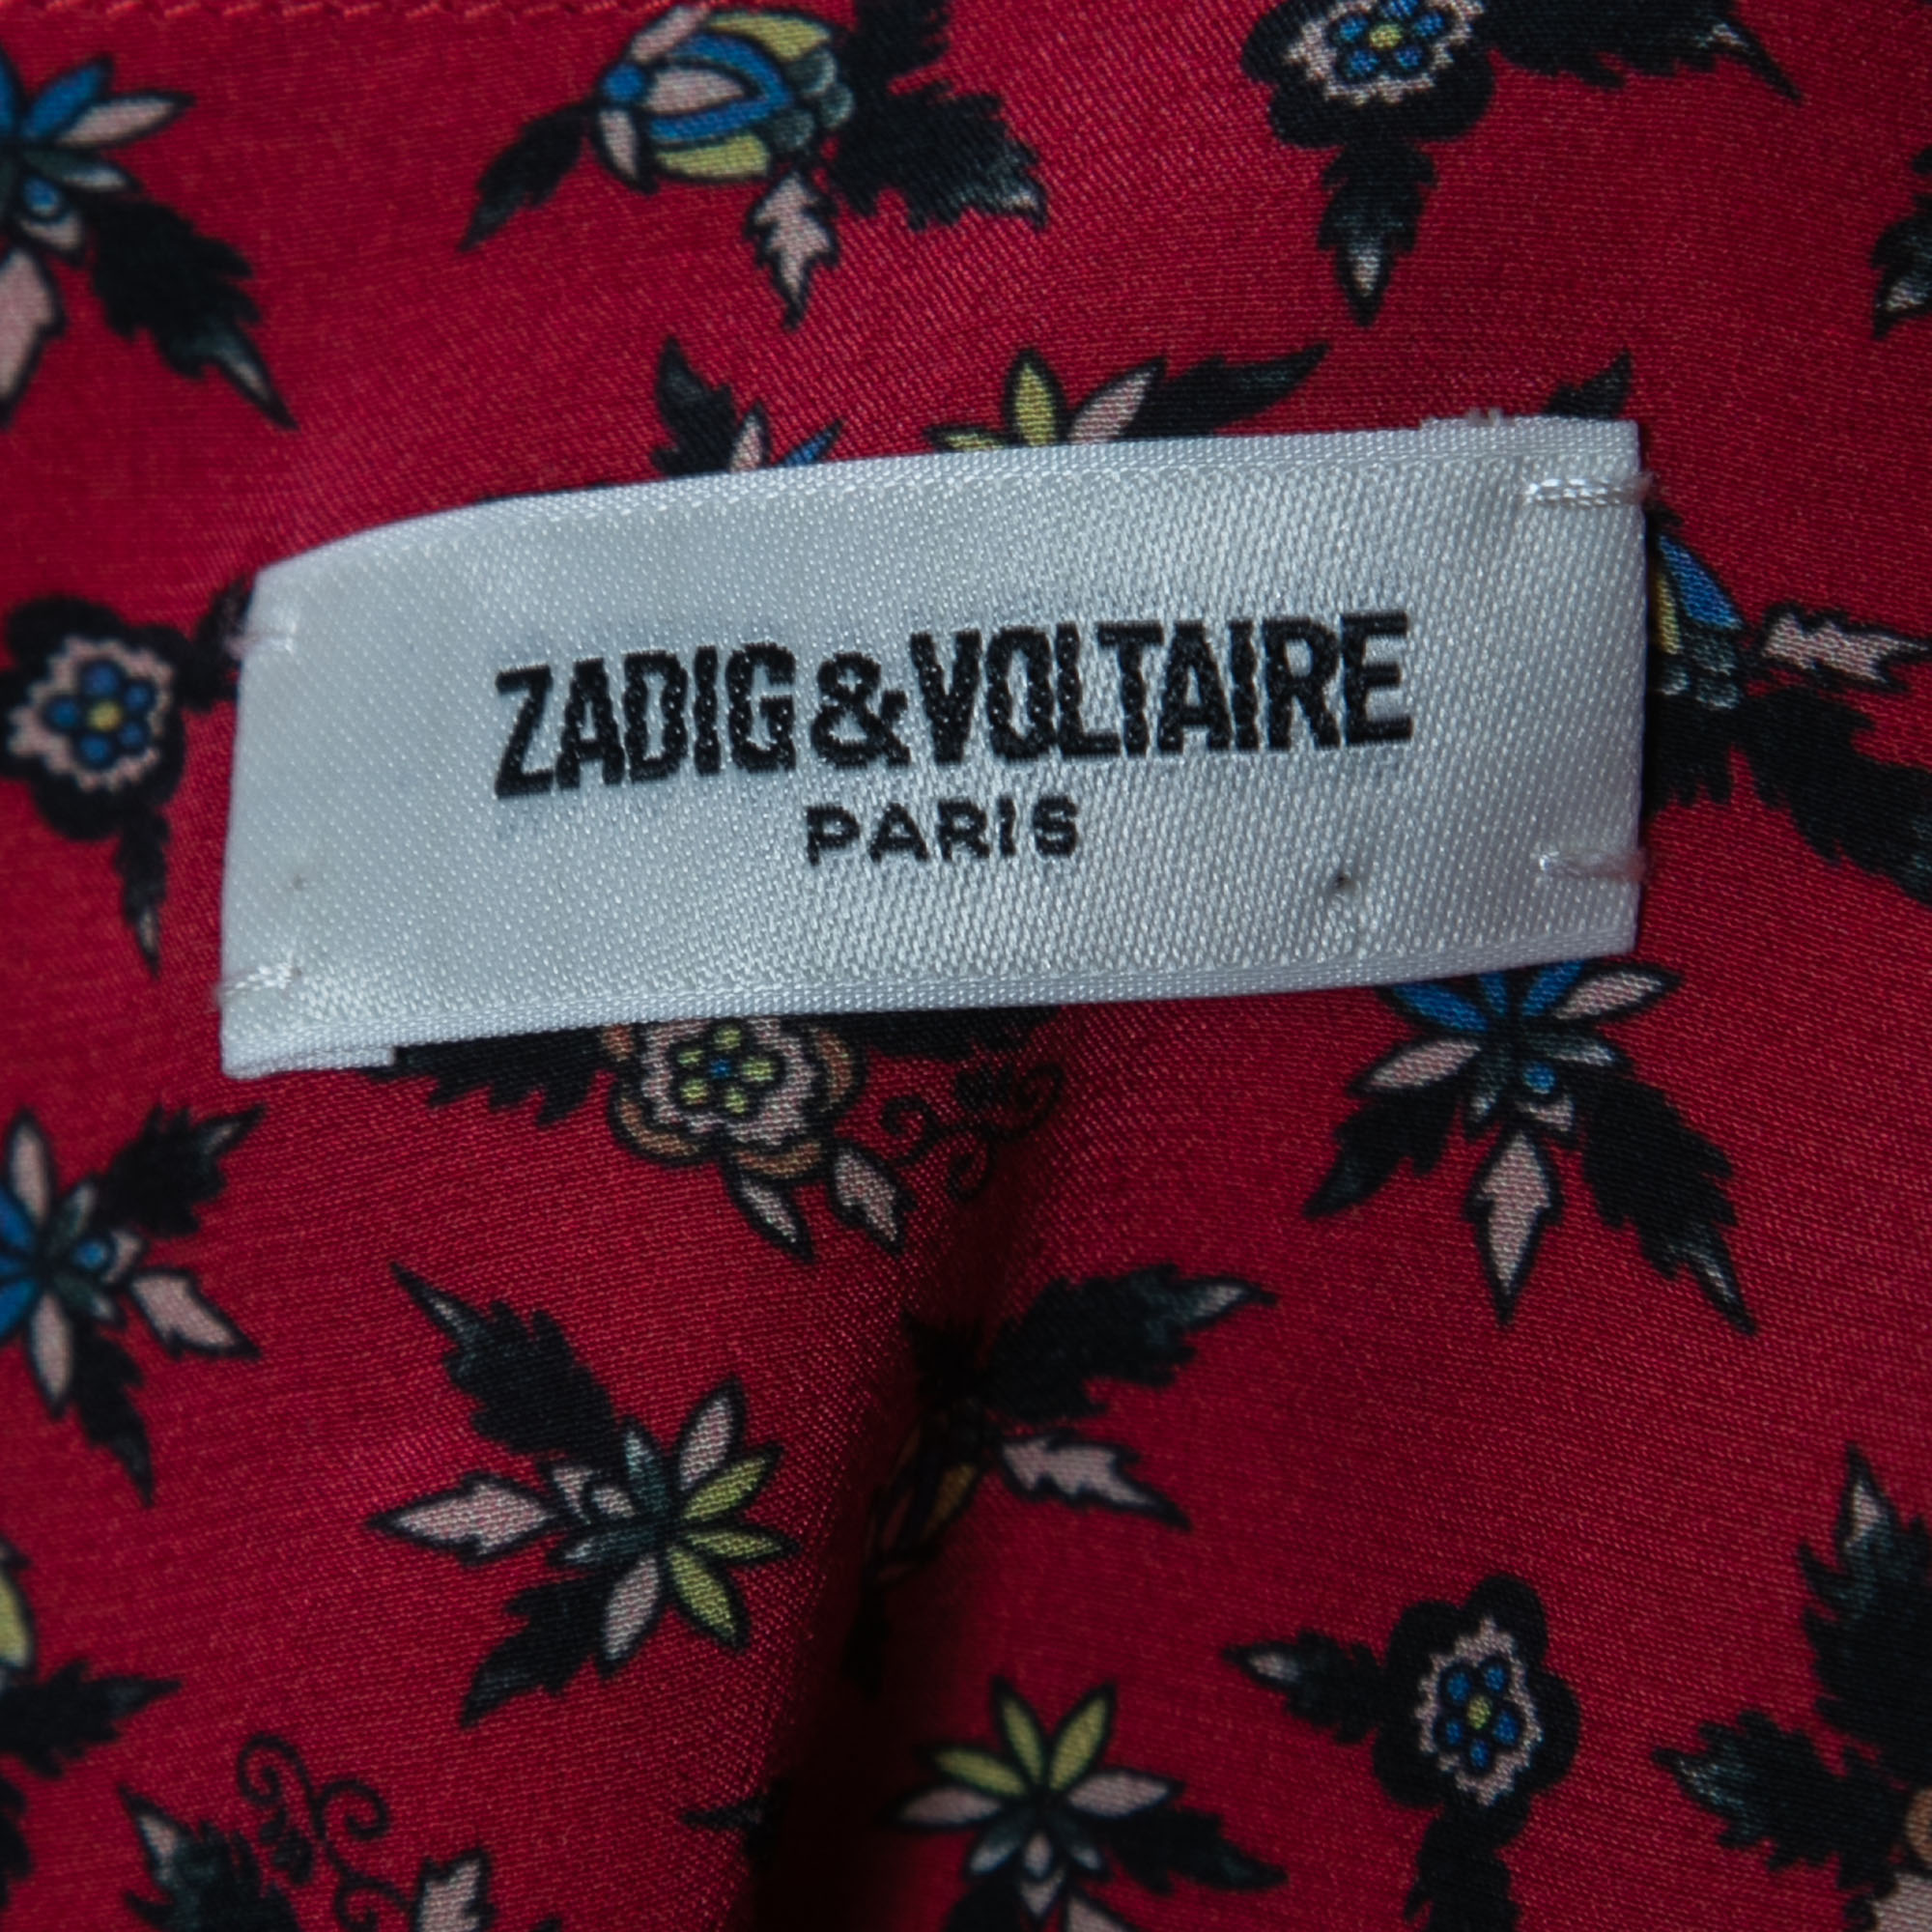 Zadig And Voltaire Red Floral Printed Crepe Tie Front Midi Dress L